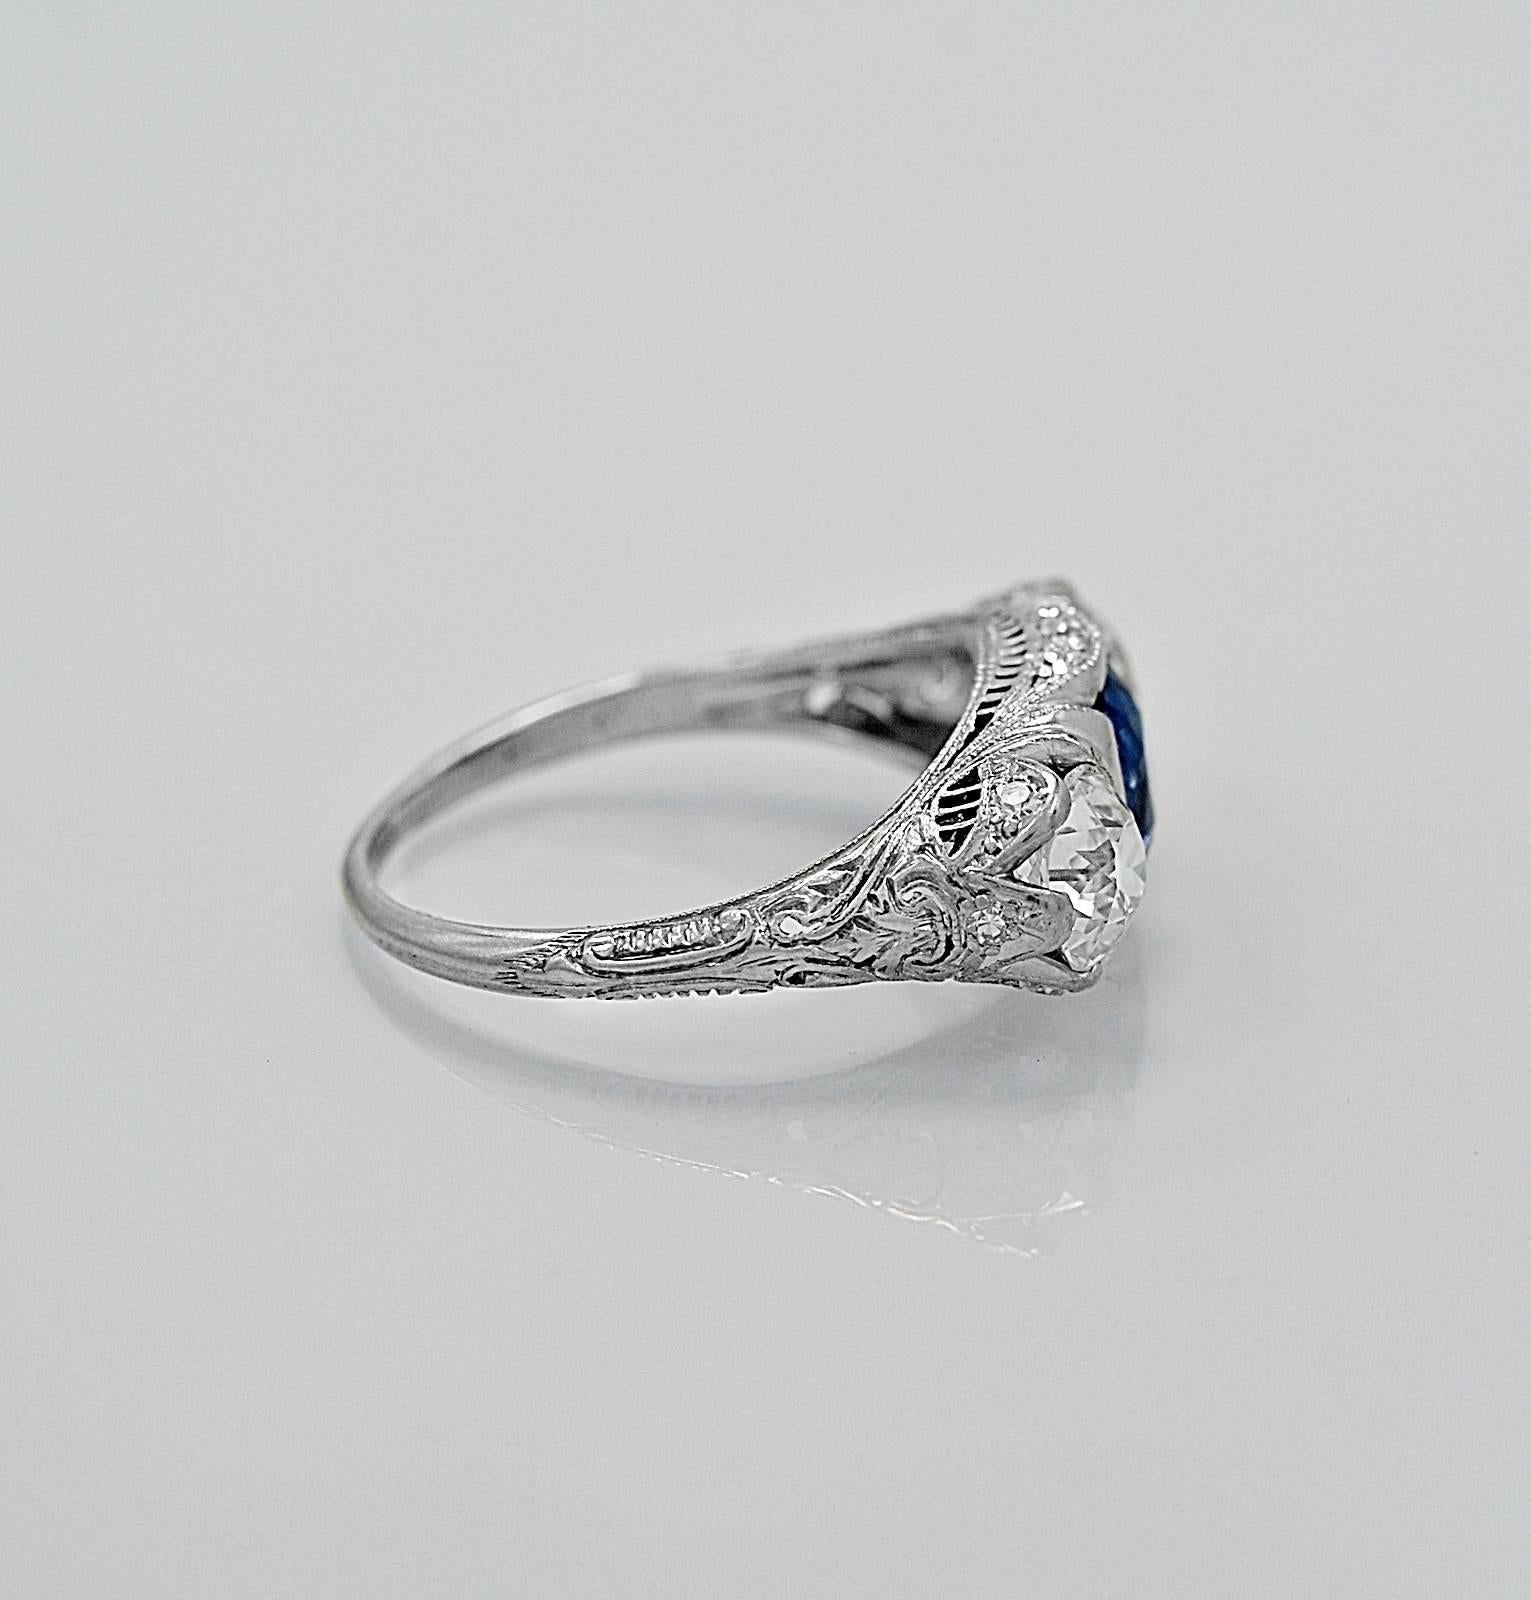 A wonderful antique 3 stone engagement ring from the Art Deco period that features a 1.25ct. apx. rich blue natural sapphire. It also showcases two European cut diamonds with 1 weighing .80ct. apx. and the other weighing .85ct. apx. with VS1-VS2